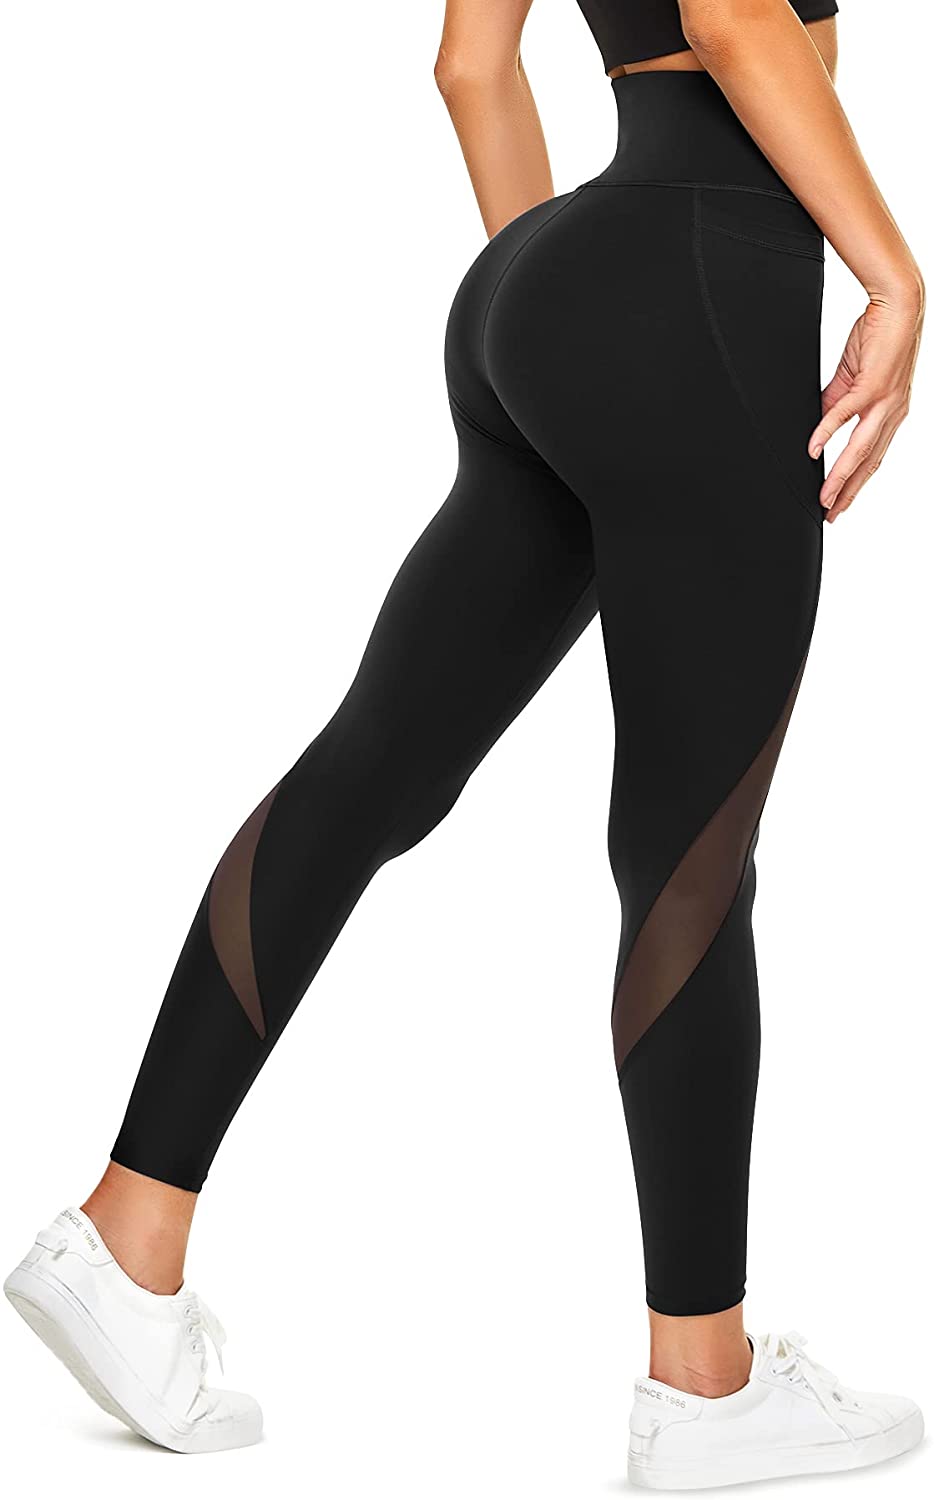 Active Lace-Up Mesh Side Workout Leggings - CHARCOAL - Treasure Island